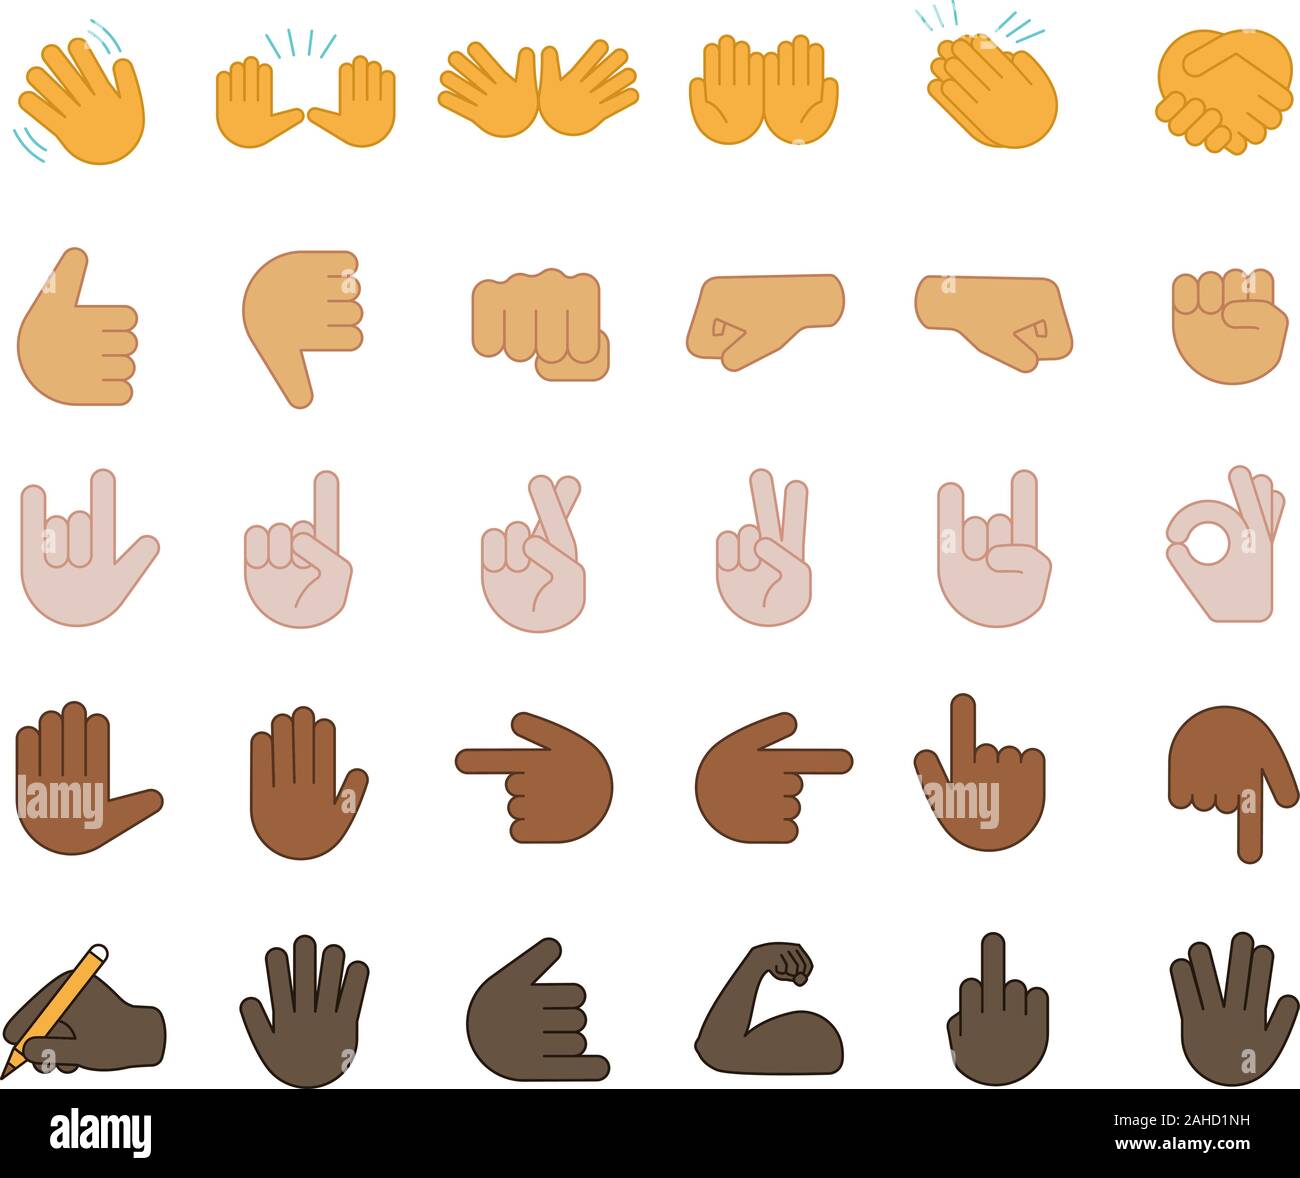 Hand gesture emojis color icons set. Pointing fingers, fists, palms. Social media, network emoticons. OK, hello, rock, like gesturing. Hand symbols. I Stock Vector